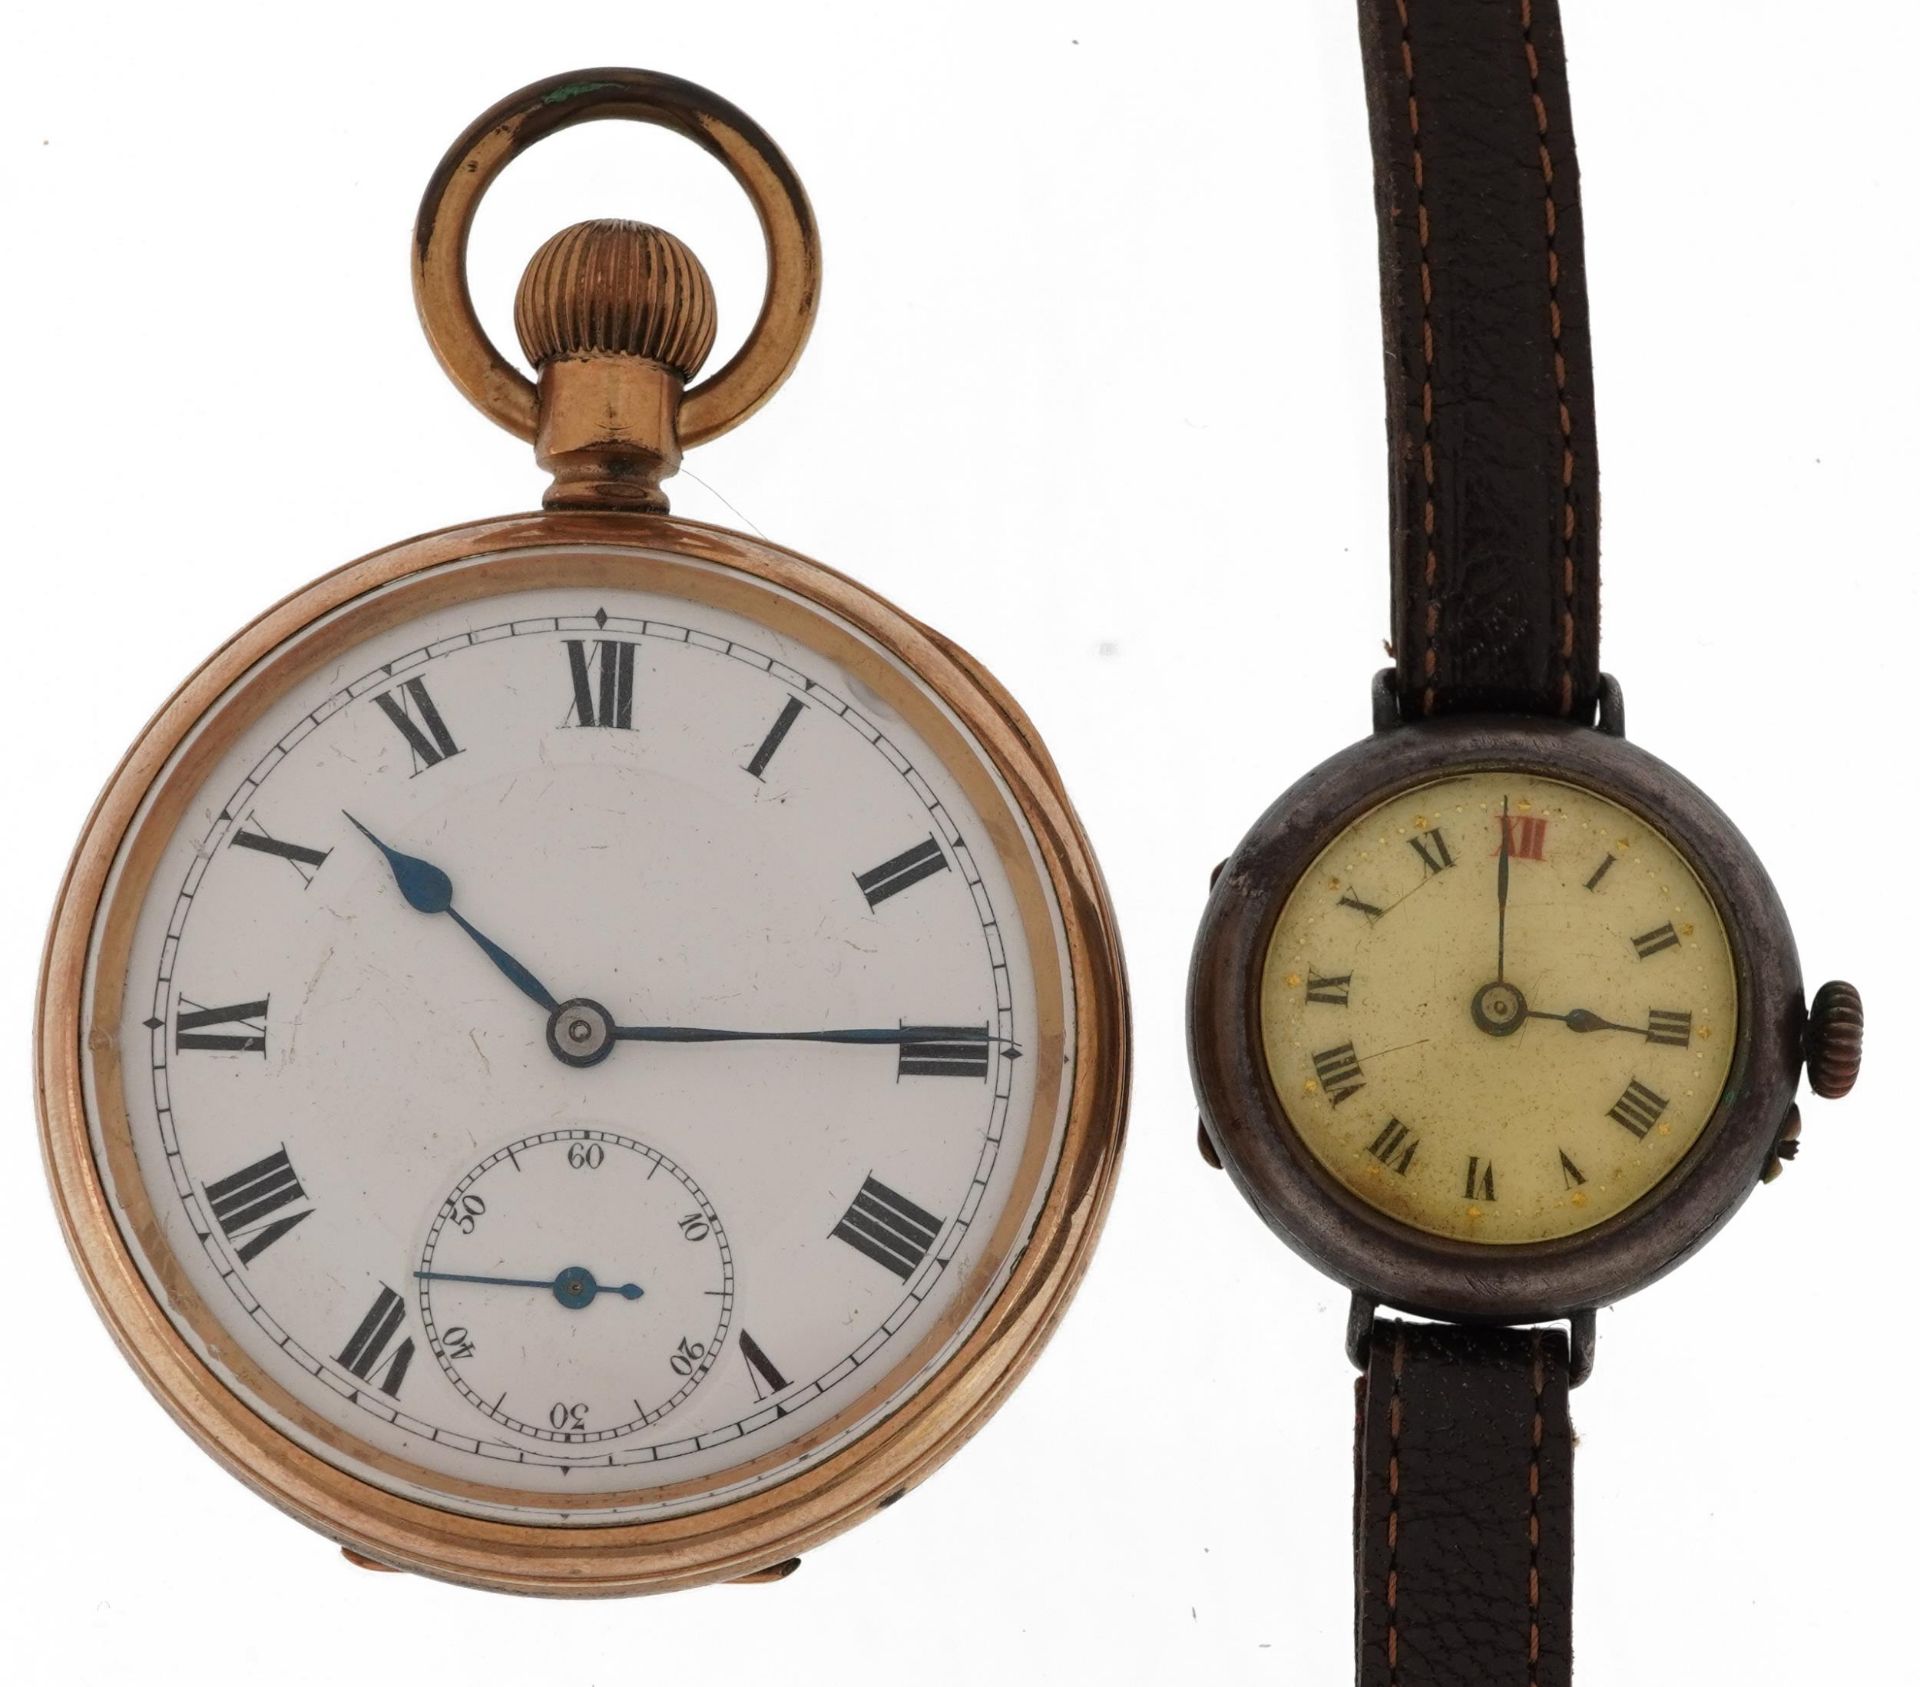 Gentlemen's military interest trench watch with enamelled dial and yellow metal American Amrok